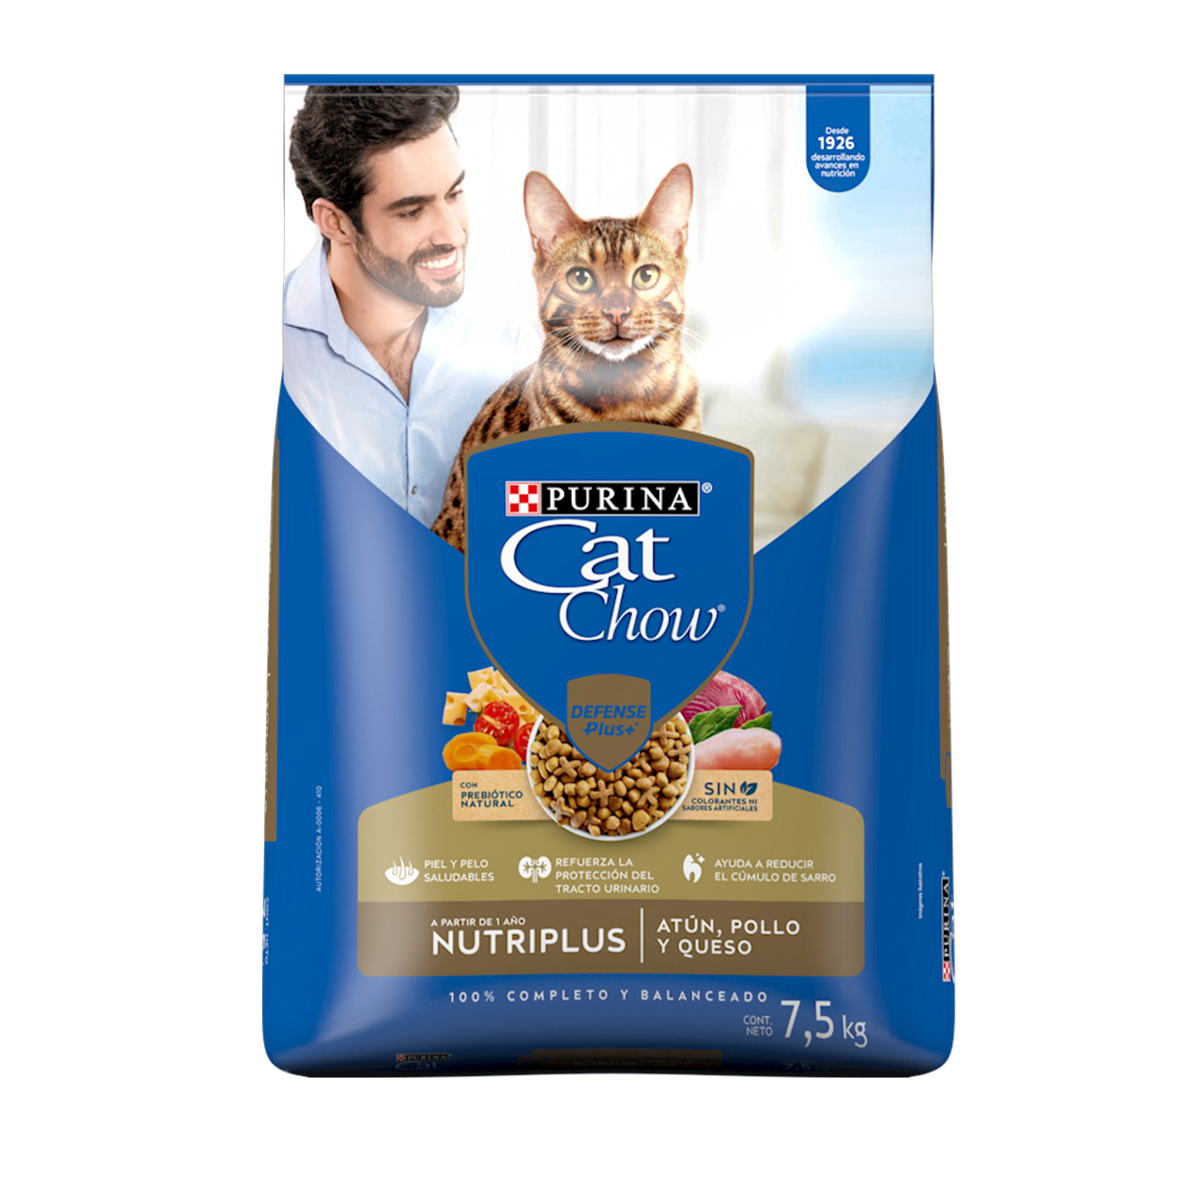 purina-cat-chow-alimento-seco-nutriplus-adultos-atun-pollo-queso_1.png